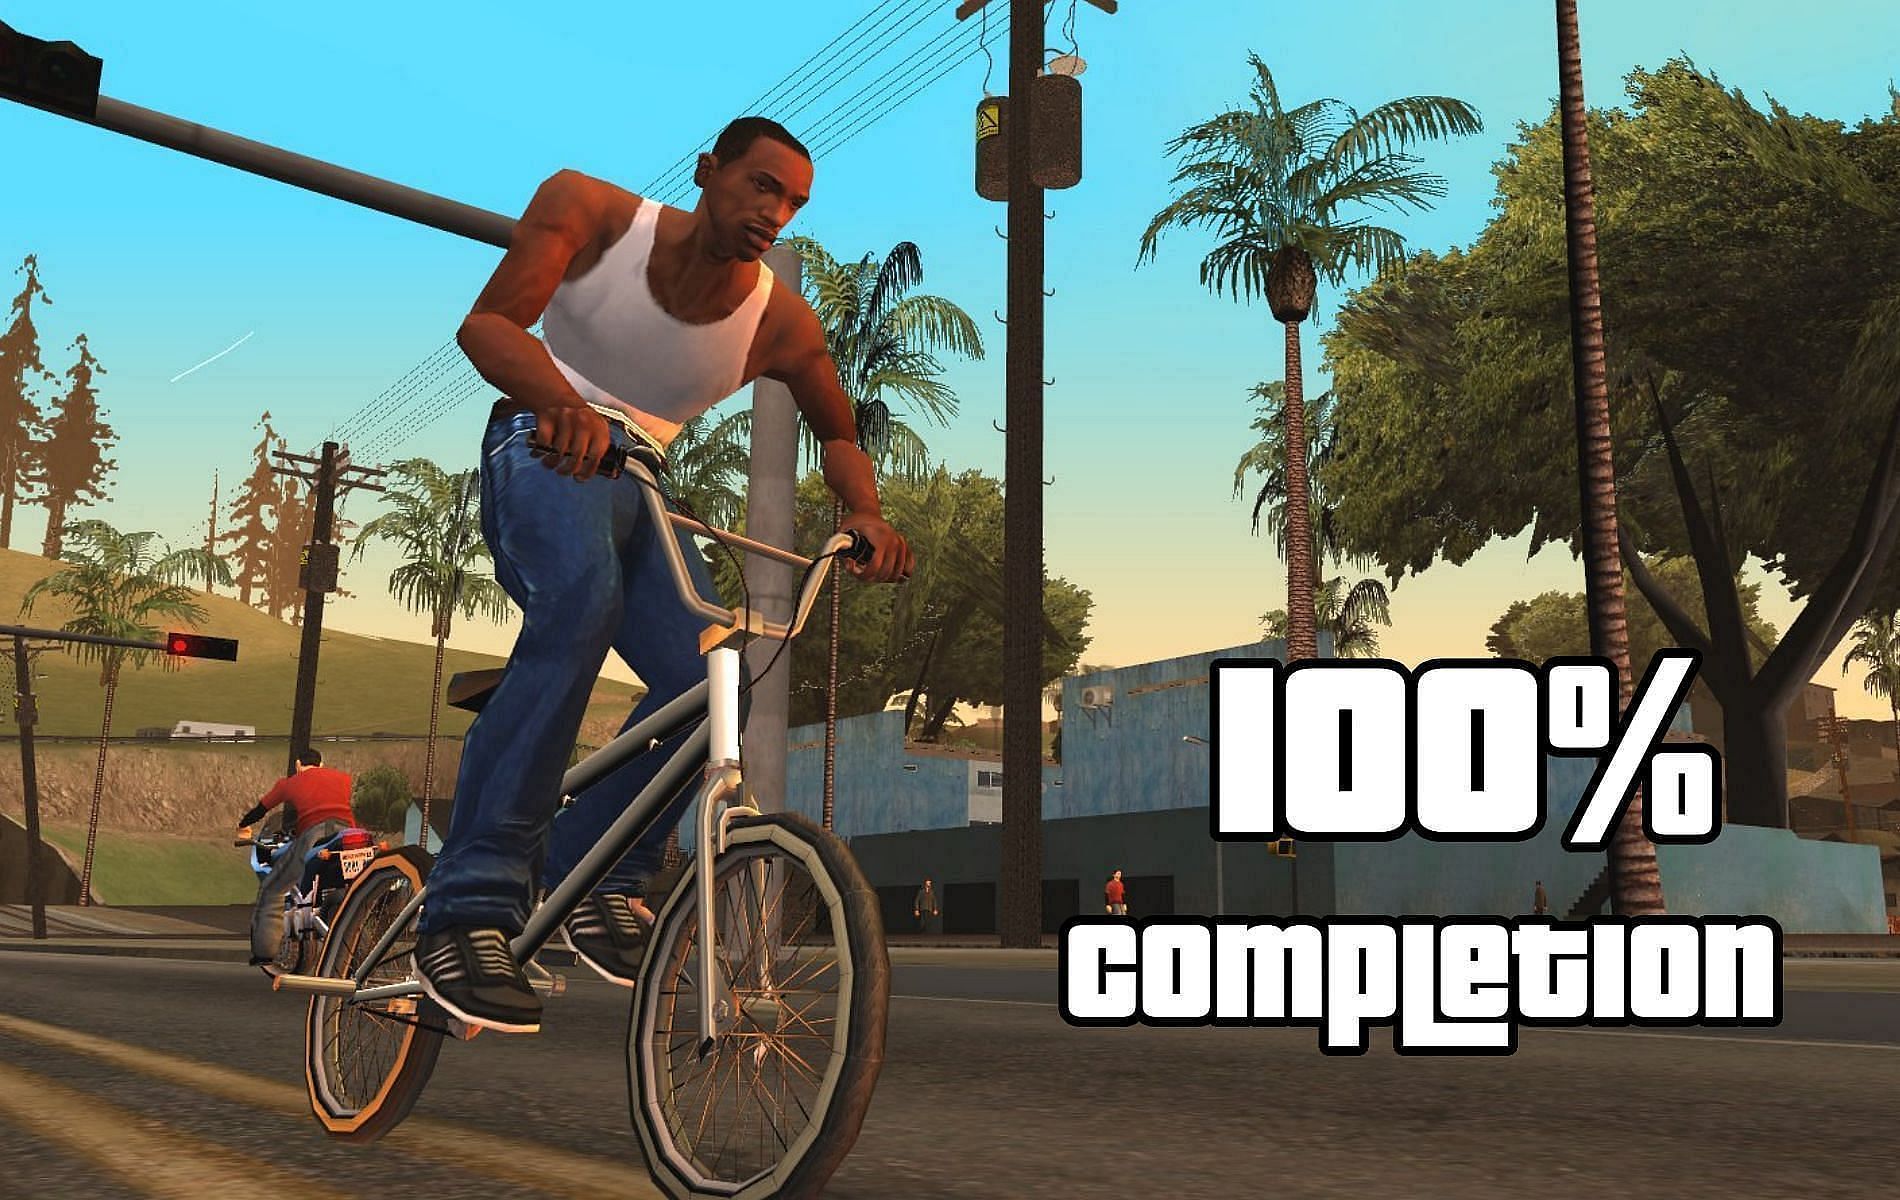 100% Completion could be fun for some GTA San Andreas players (Image via Rockstar Games)